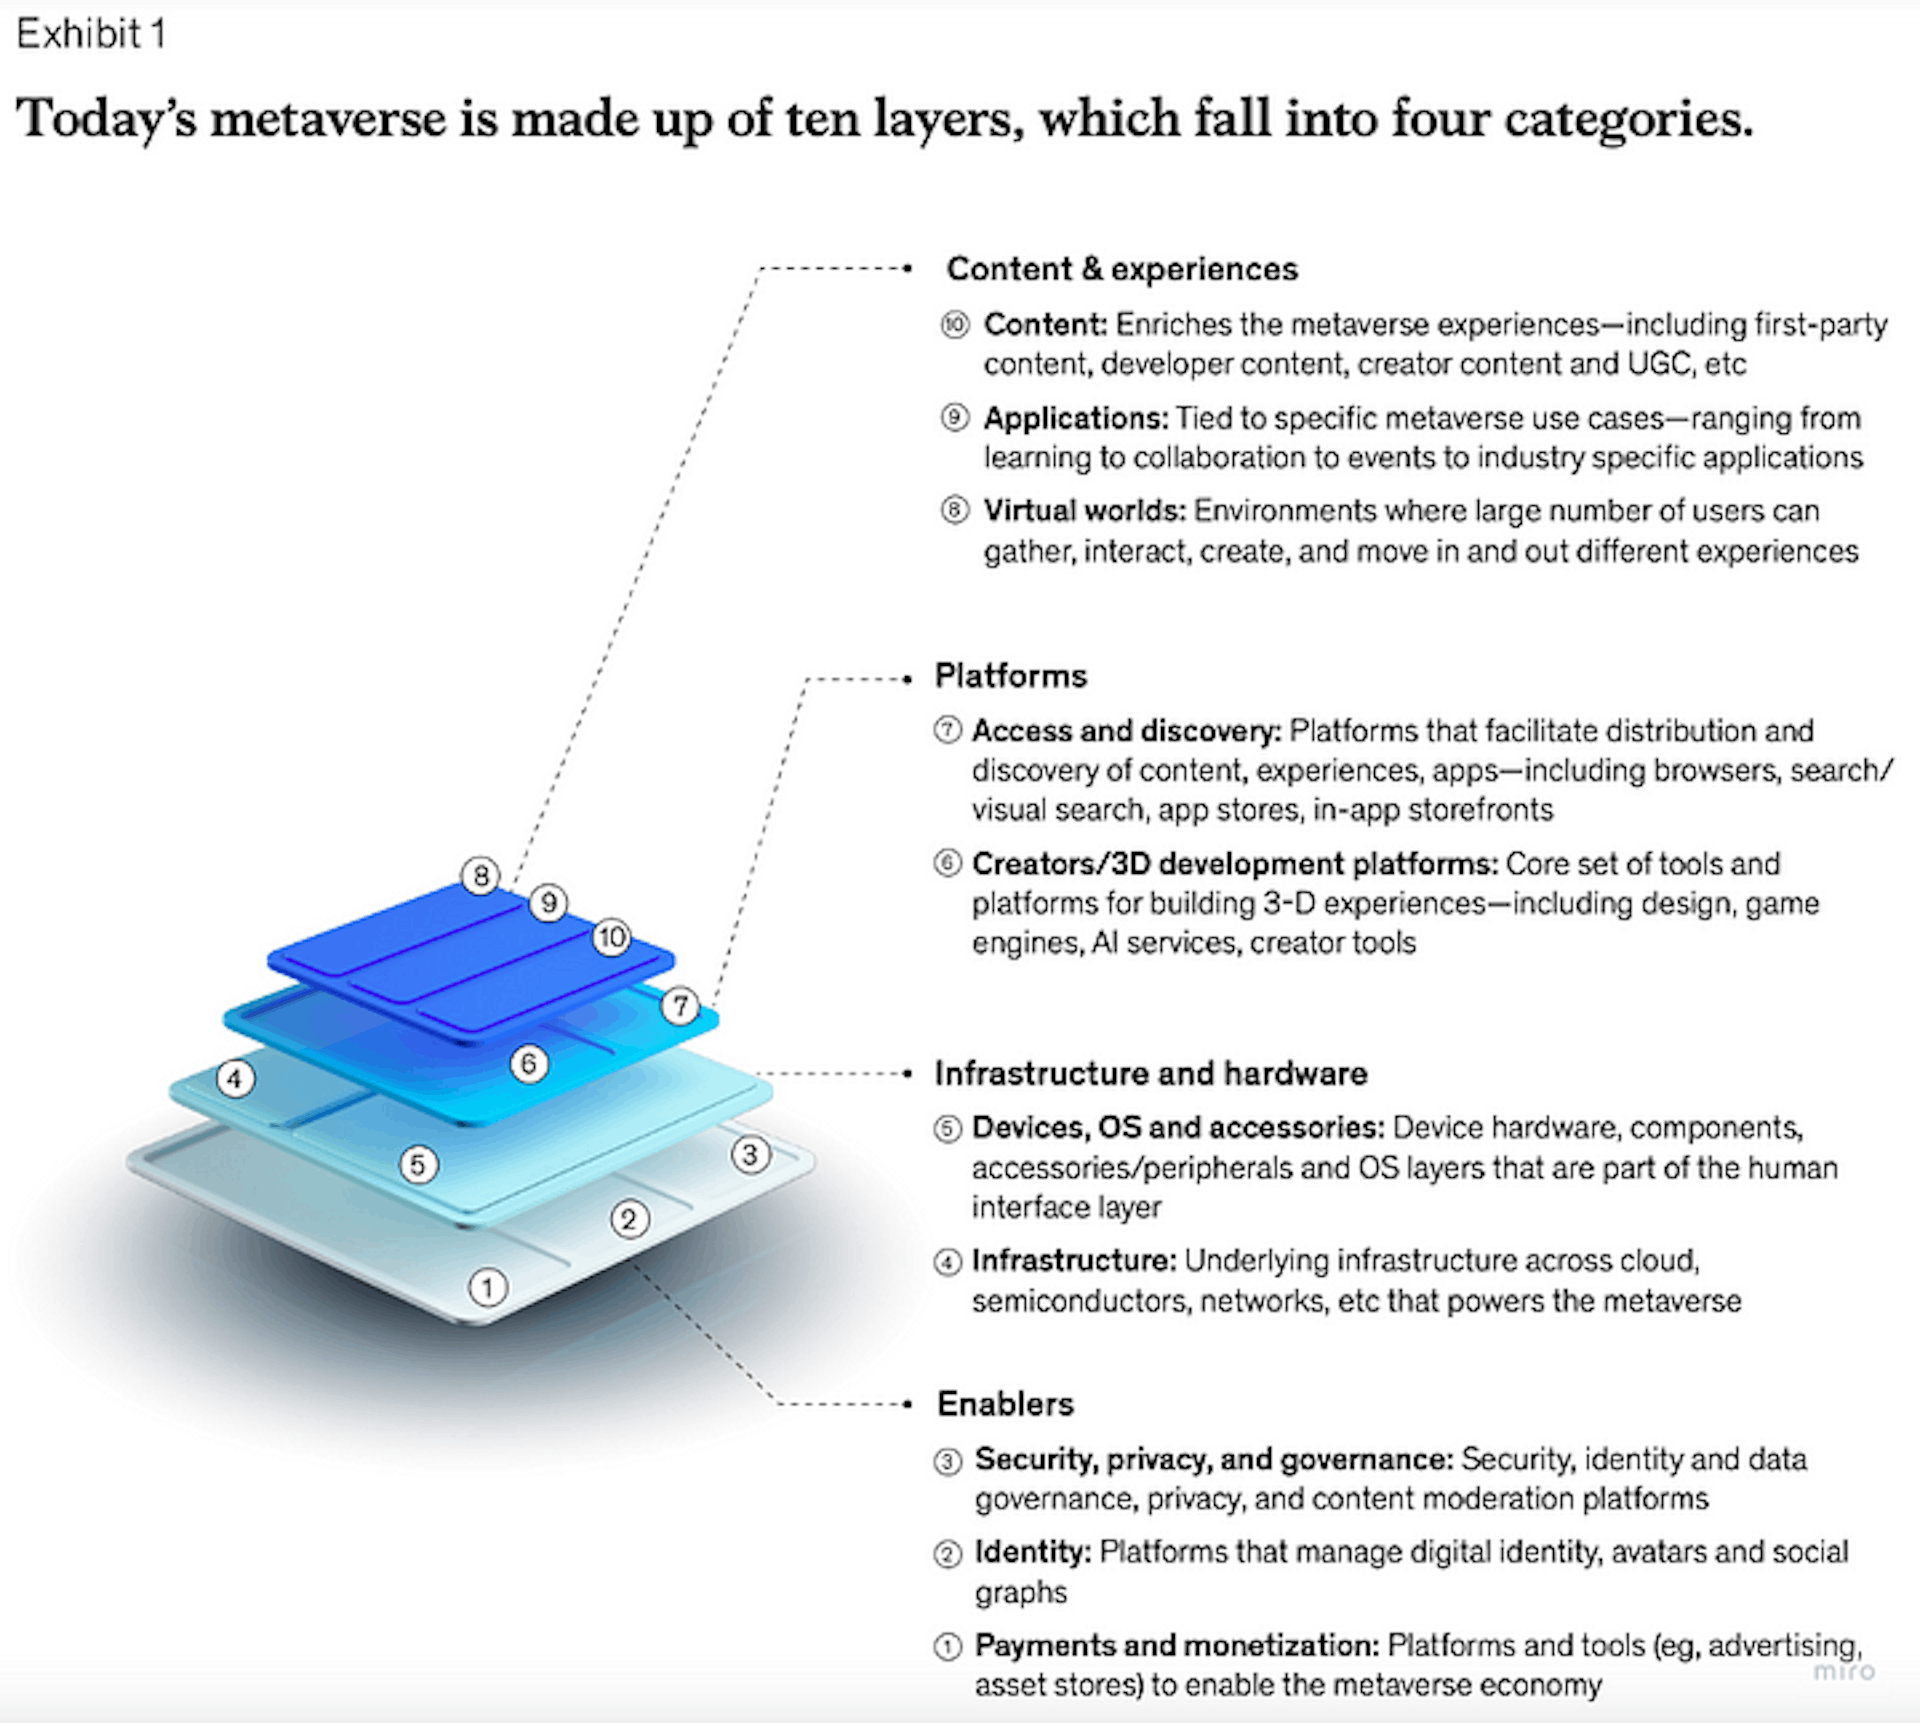 Source: Value Creation In The Metaverse Report by McKinsey&Company